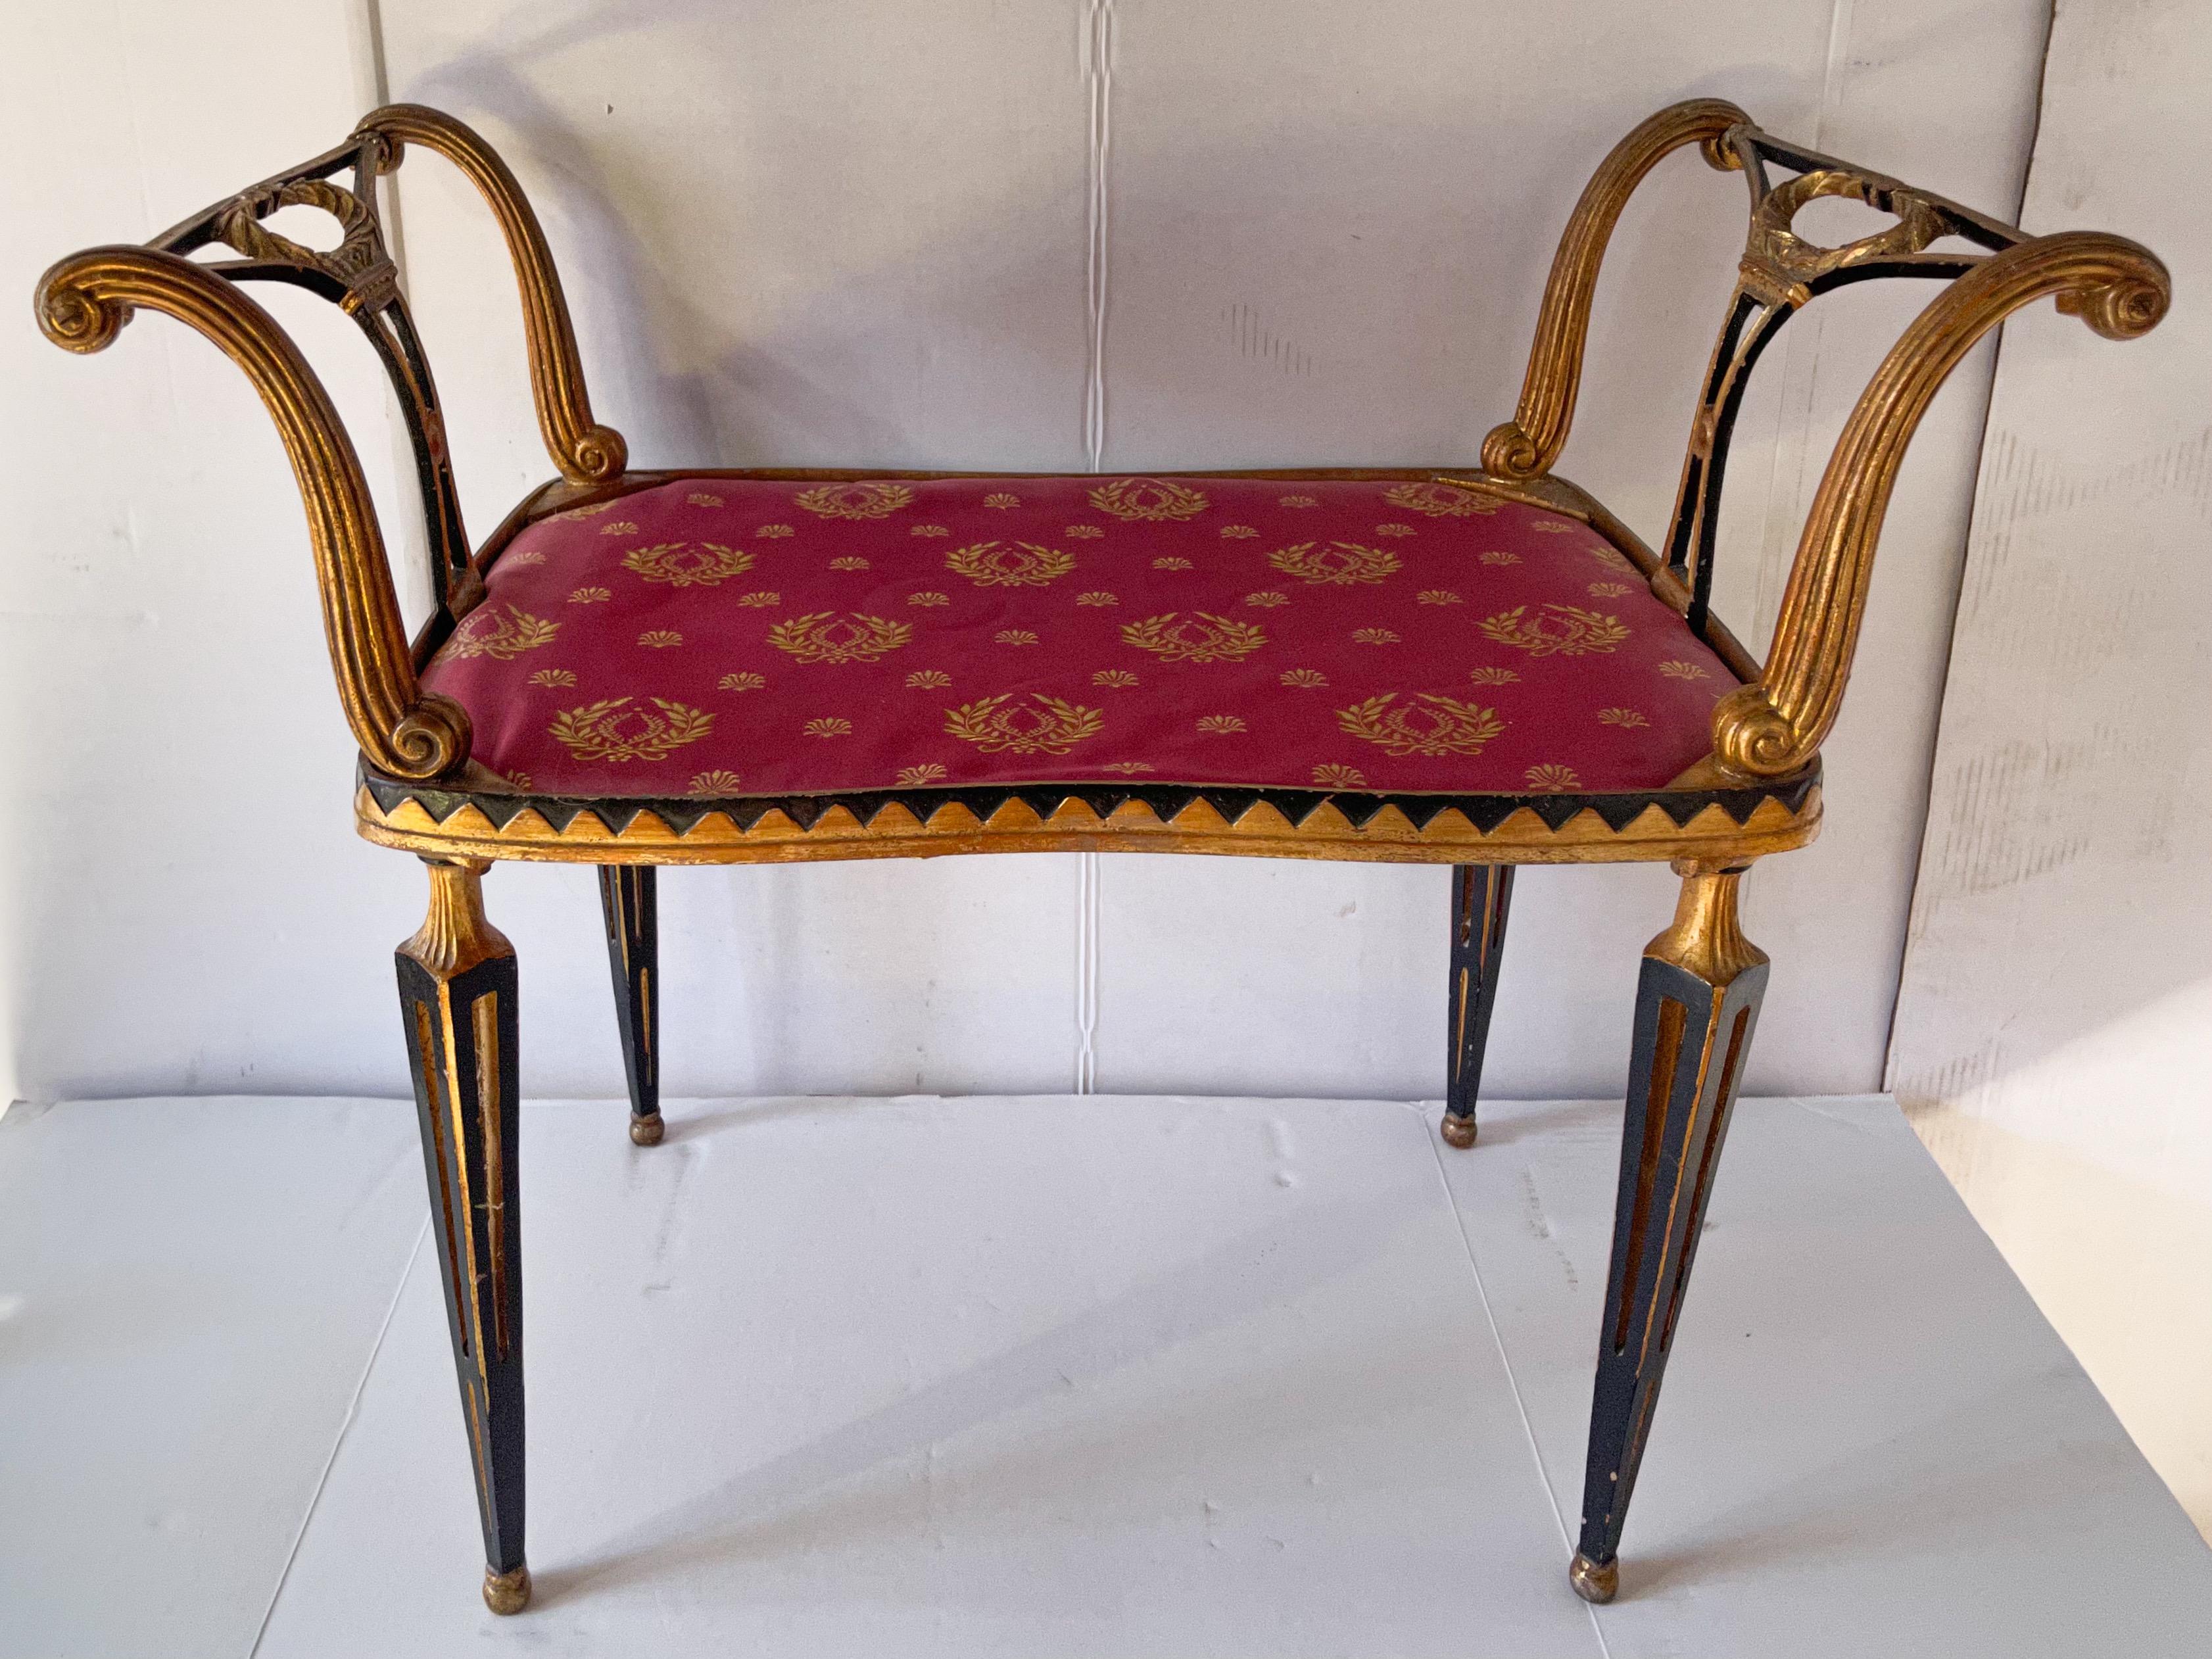 1950s Italian Regency Style Gilt Metal Tole Painted Bench in French Silk In Good Condition For Sale In Kennesaw, GA